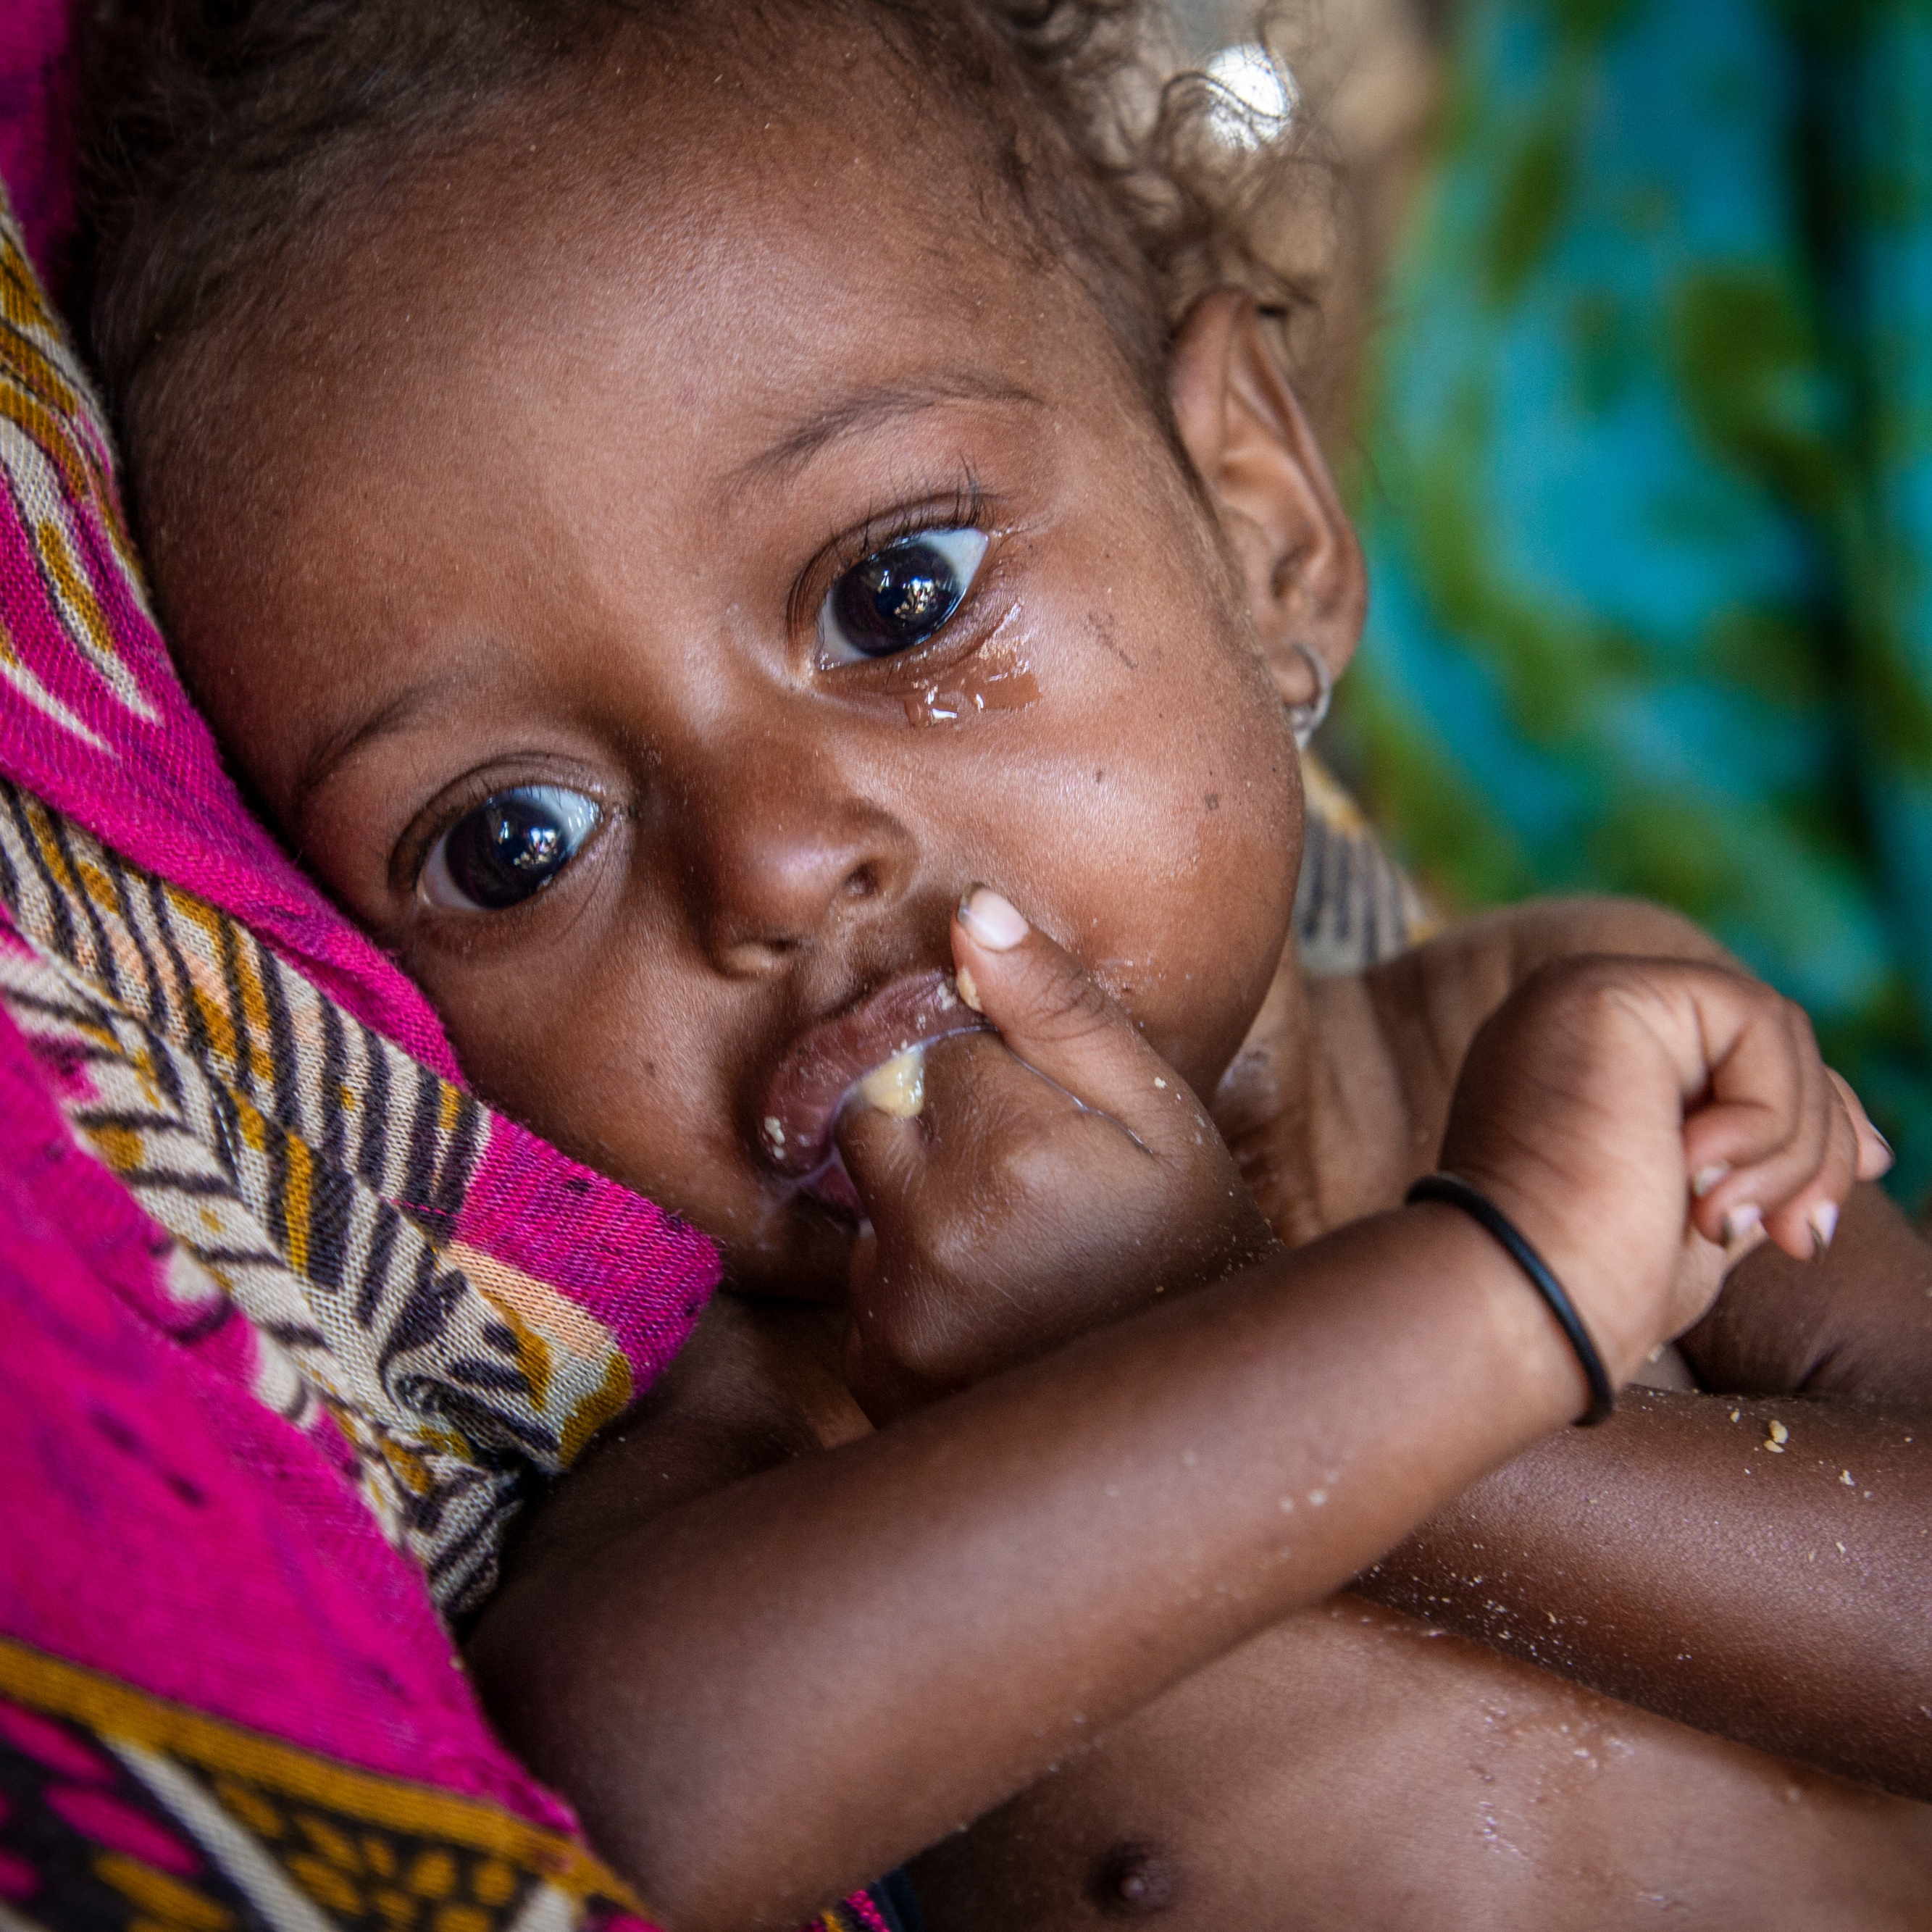 An 11-month old baby girl suffering from severe acute malnutrition eats a nutritious peanut paste given by a Save the Children health worker in a camp for Internally Displaced People (IDP) in Lahj district, Yemen. Photo credit: Jonathan Hyams / Save the Children, Nov 2018.